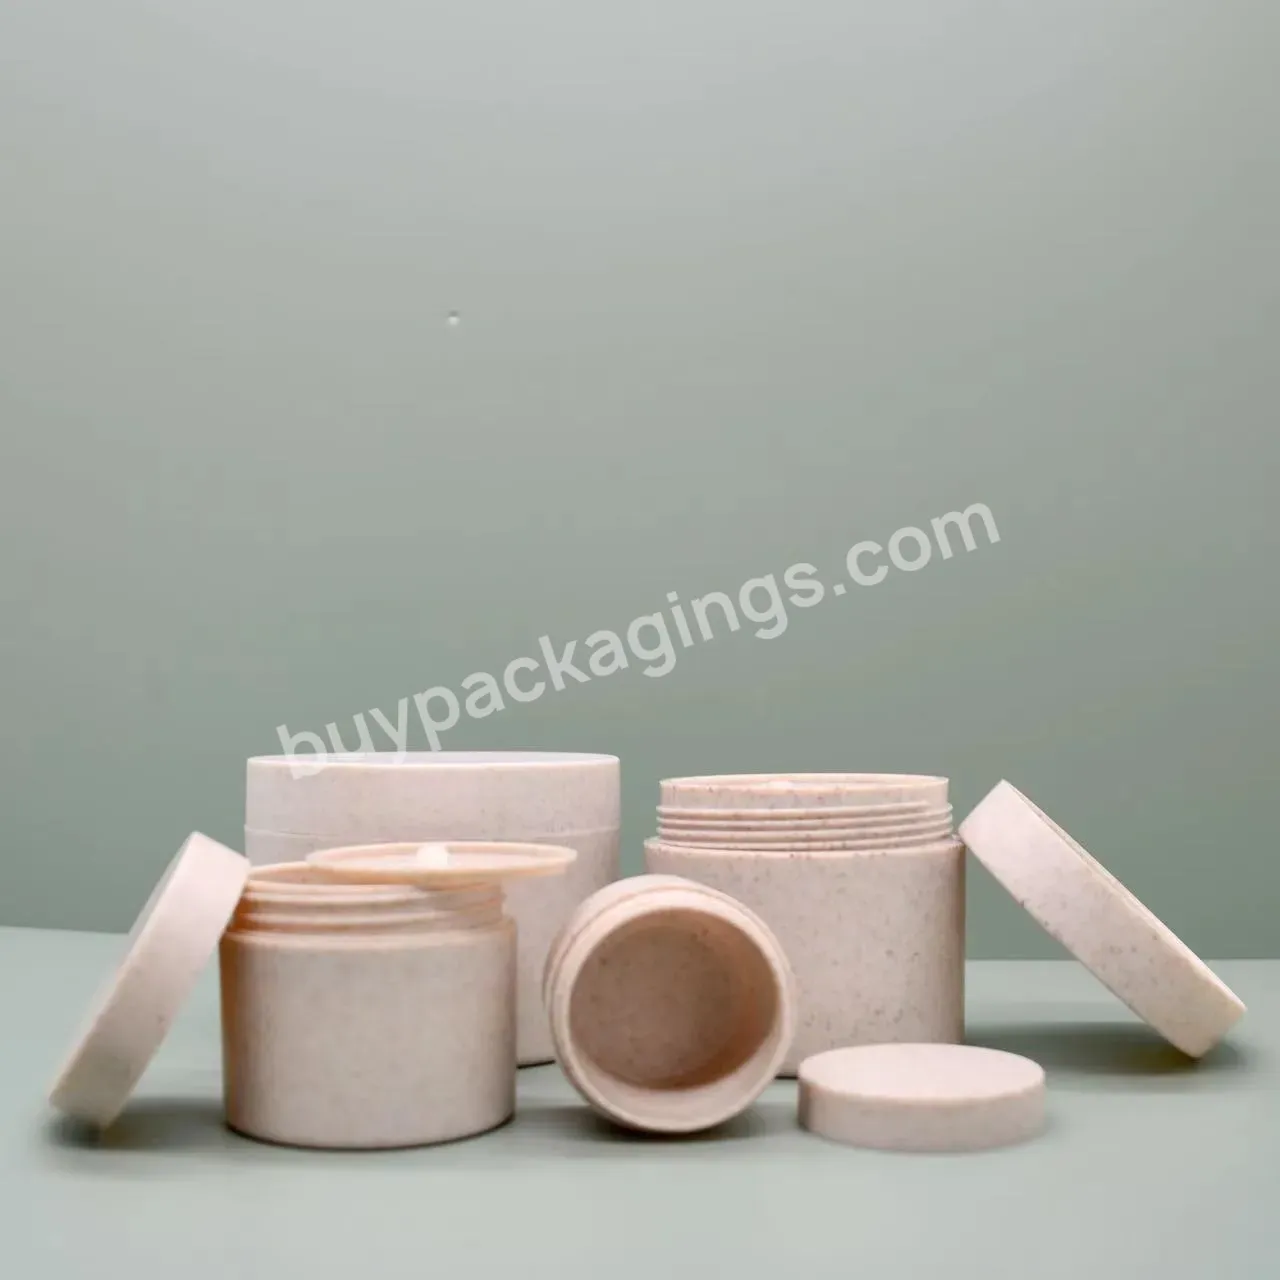 Recyclable Wheat Straw Cosmetic Jar Biodegradable Bottle 30ml 50ml 100ml 250ml Cream Jar - Buy Wheat Straw Jar,Wheat Straw Cosmetic Jar,Biodegradable Jars.